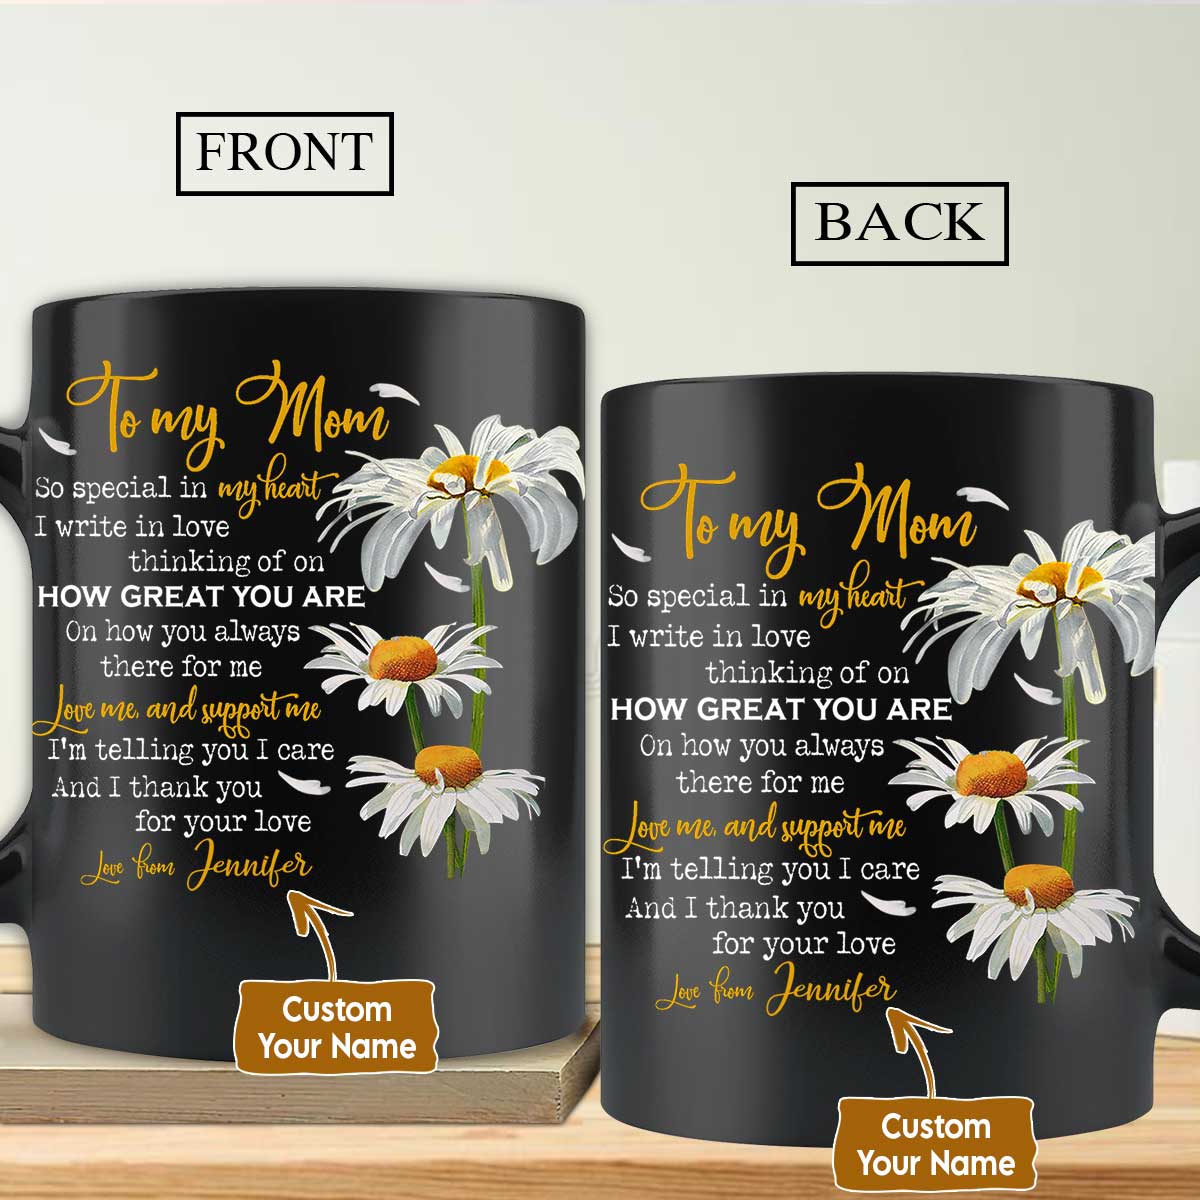 Gift For Mom Personalized Mug - Daughter to mom, Daisy painting Mug - Custom Gift For Mother's Day, Presents for Mom - I thank you for your love Mug